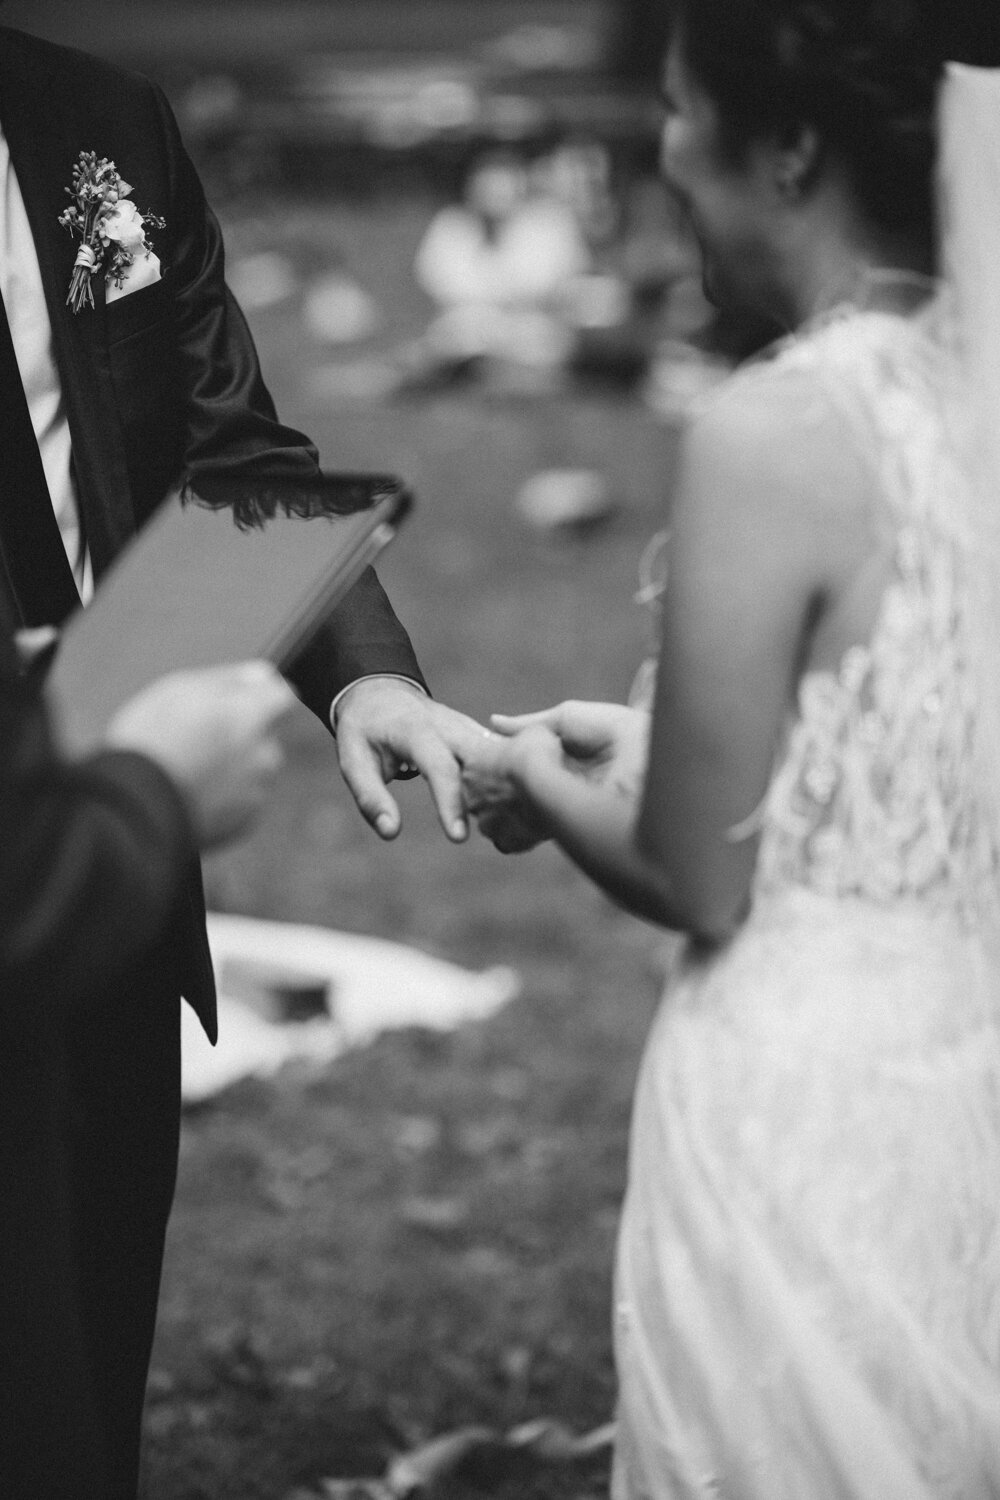 Bride holds the groom's hand and puts a wedding ring on his finger.

Central Park Wedding Photography. Williamsburg Bridge Bridal Portraits. Luxury NYC Wedding Photographer. Manhattan Micro Wedding.